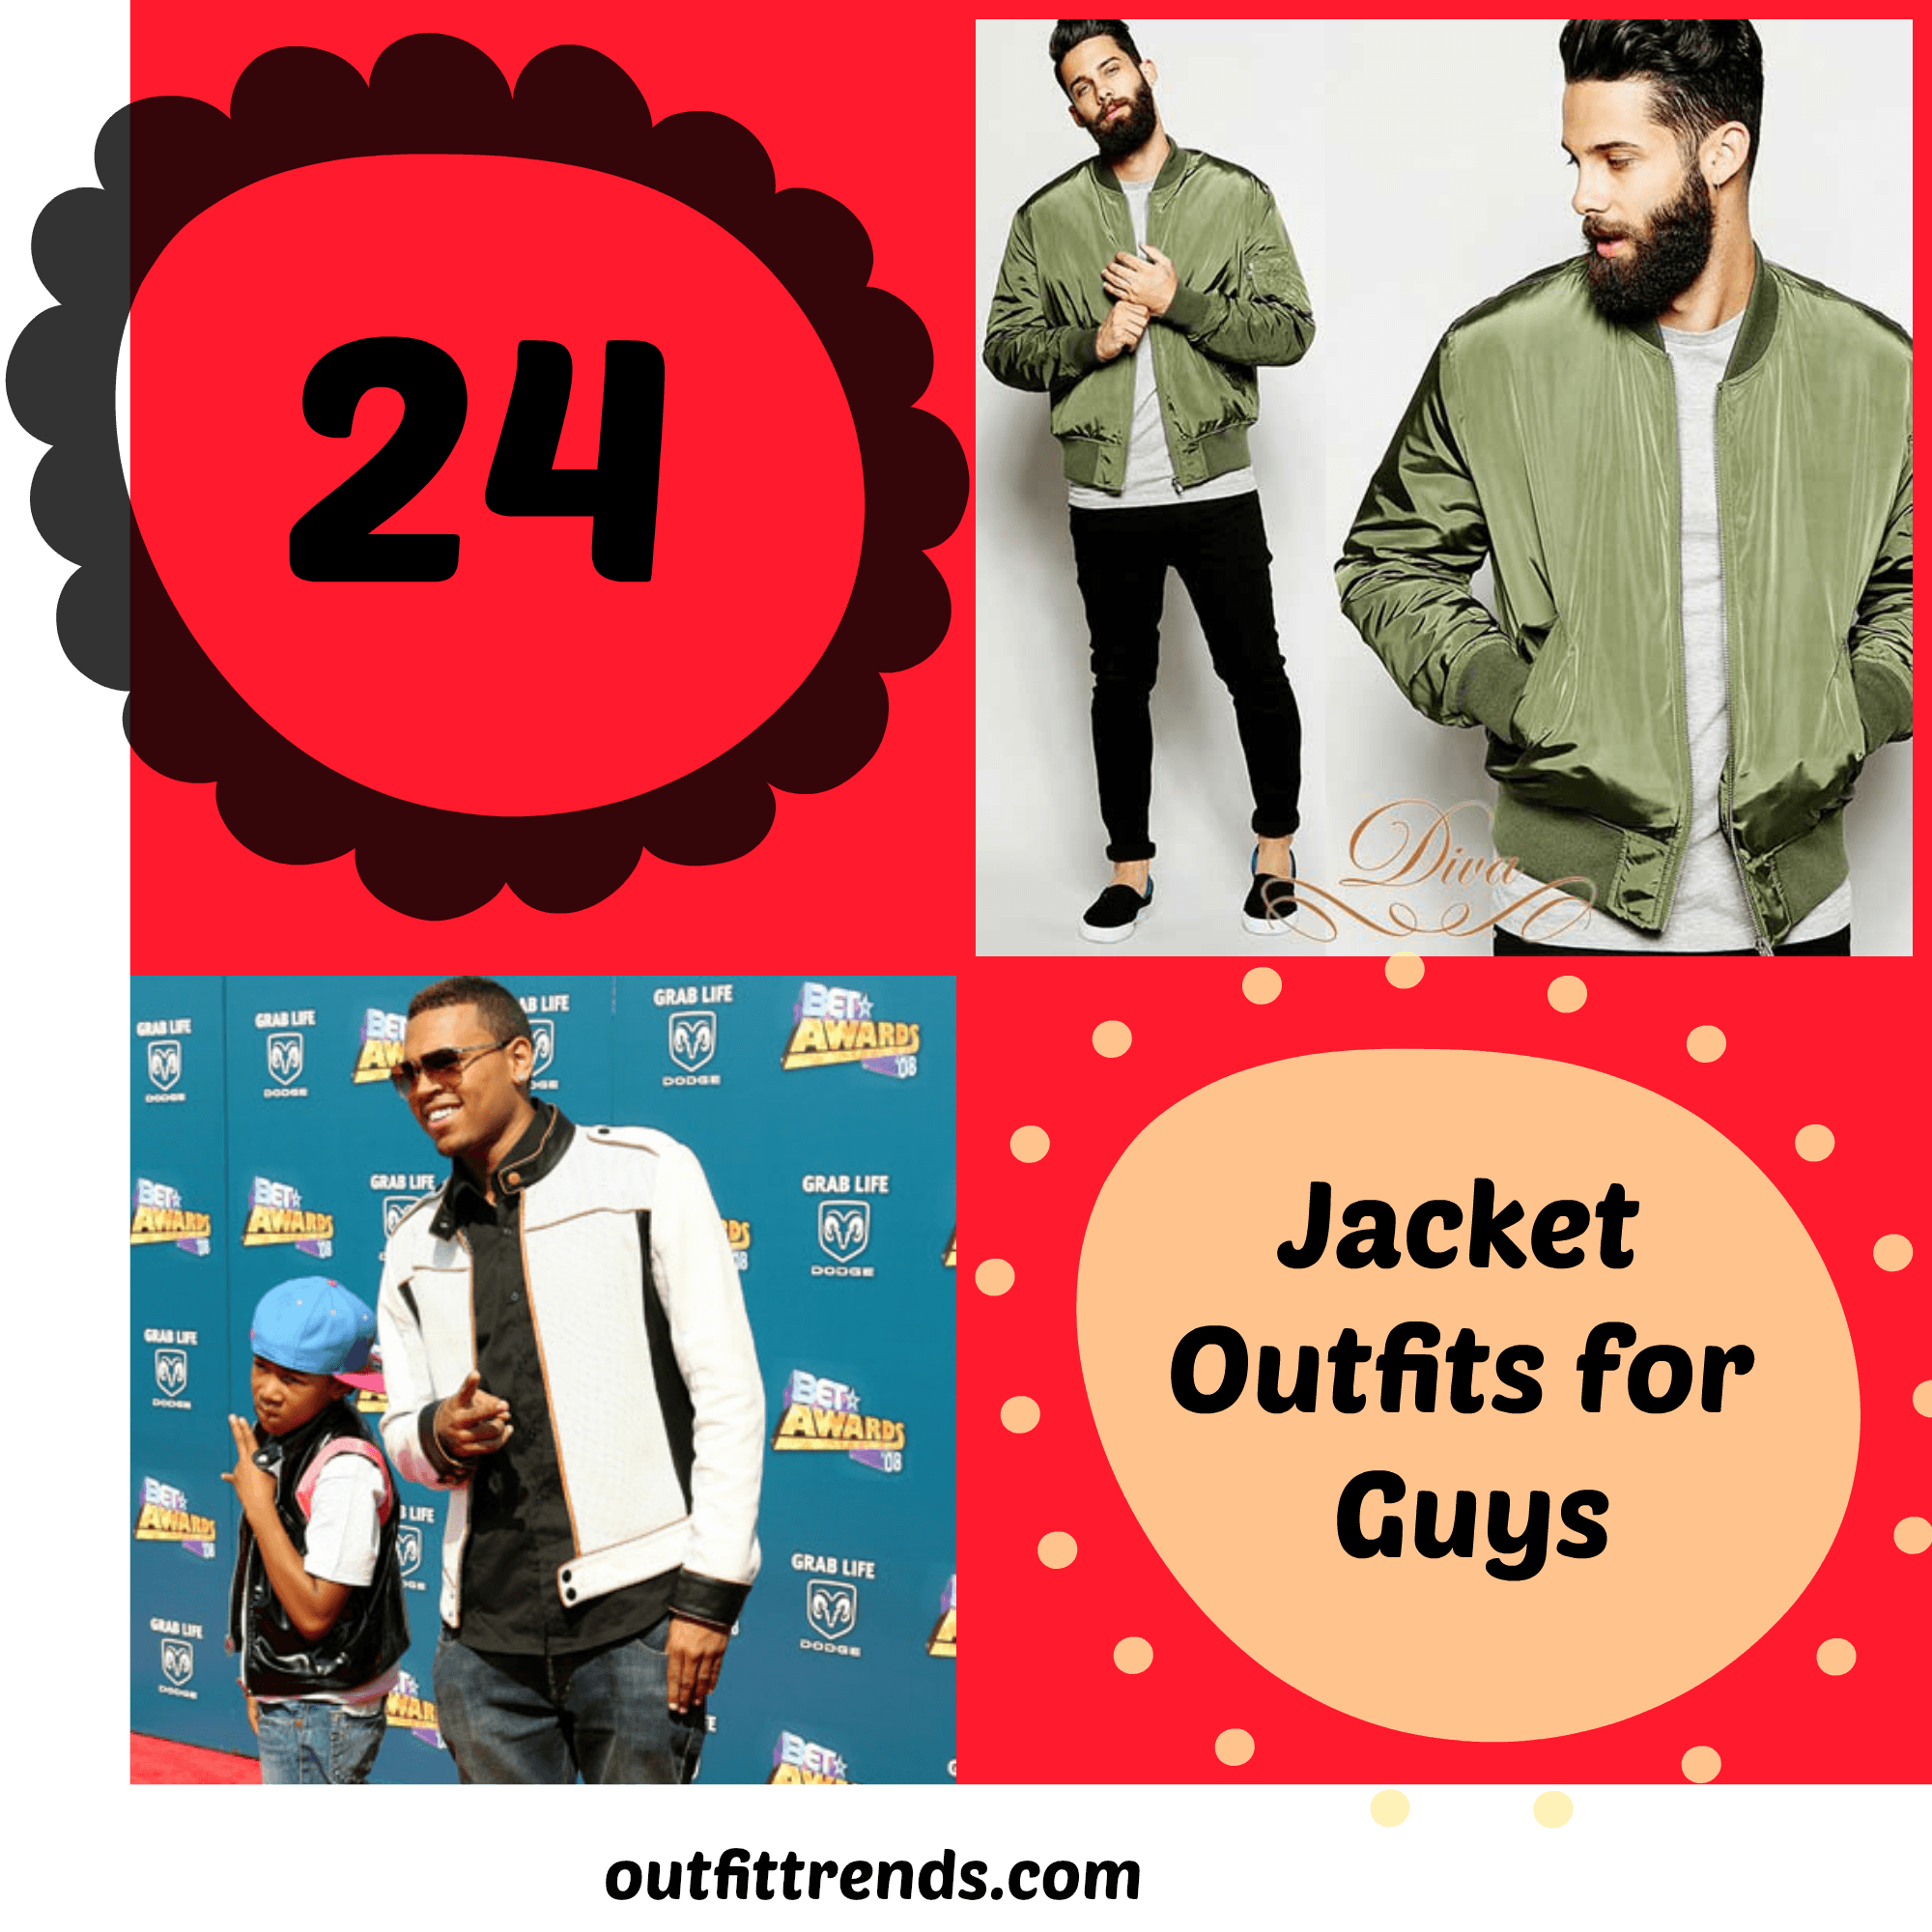 Jacket Outfits for Guys – 24 Ways to Style Jackets Sharply